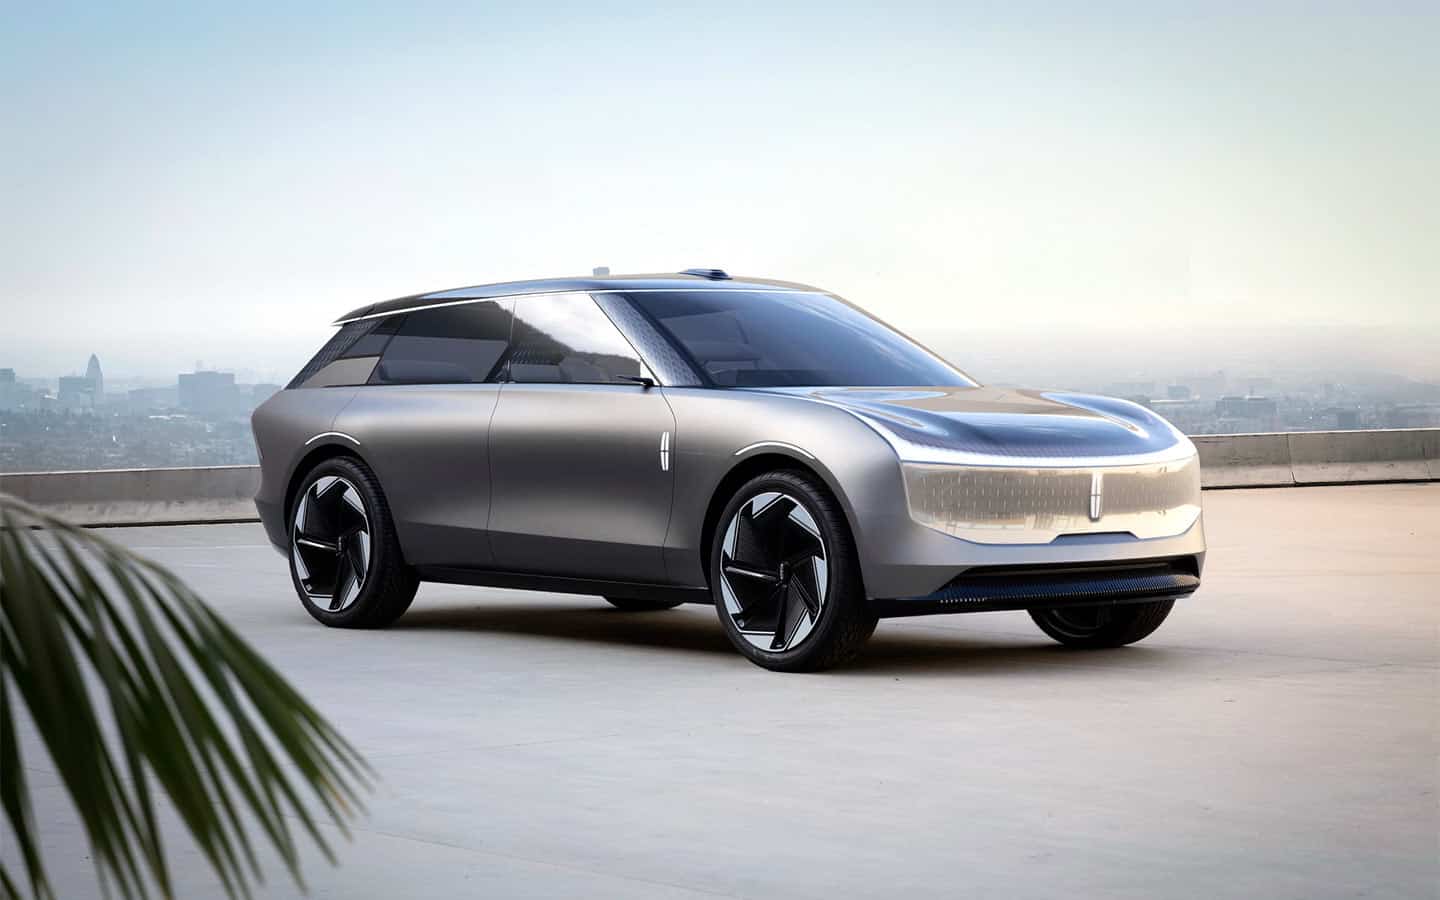 Lincoln showed an unmanned transforming car